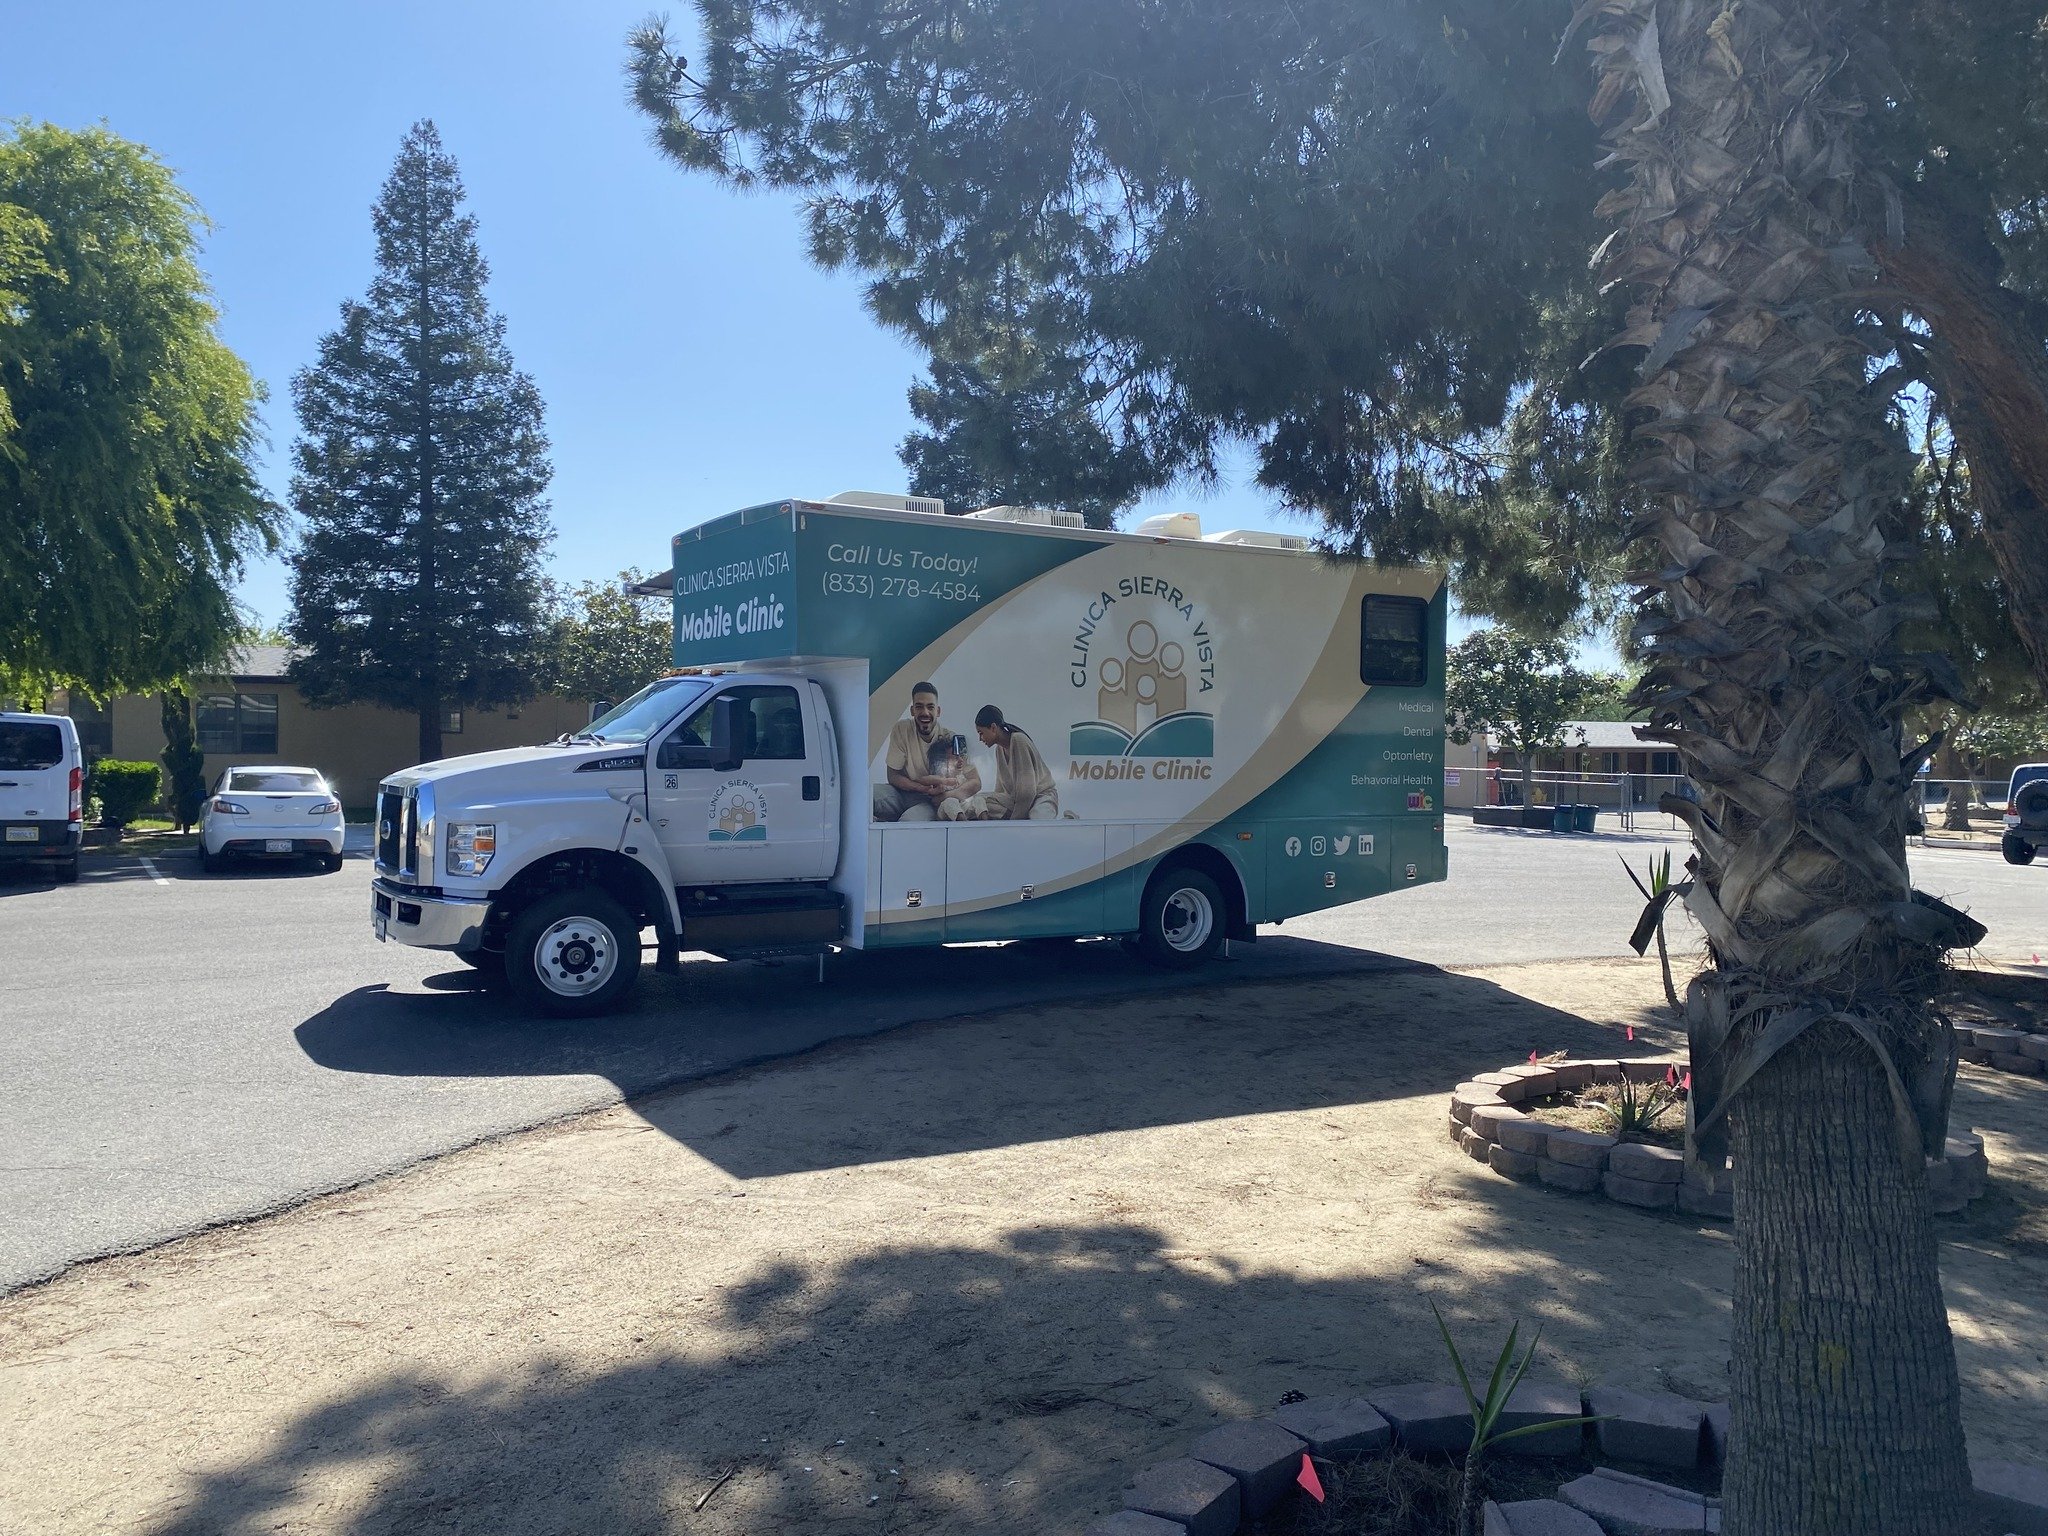 Huge thanks to our amazing partners at @clinicasierravista for bringing their Mobile Clinic to CAP! 🚑 Your commitment to providing onsite medical care to our residential substance abuse program is truly life-changing. Thanks to you, our clients have